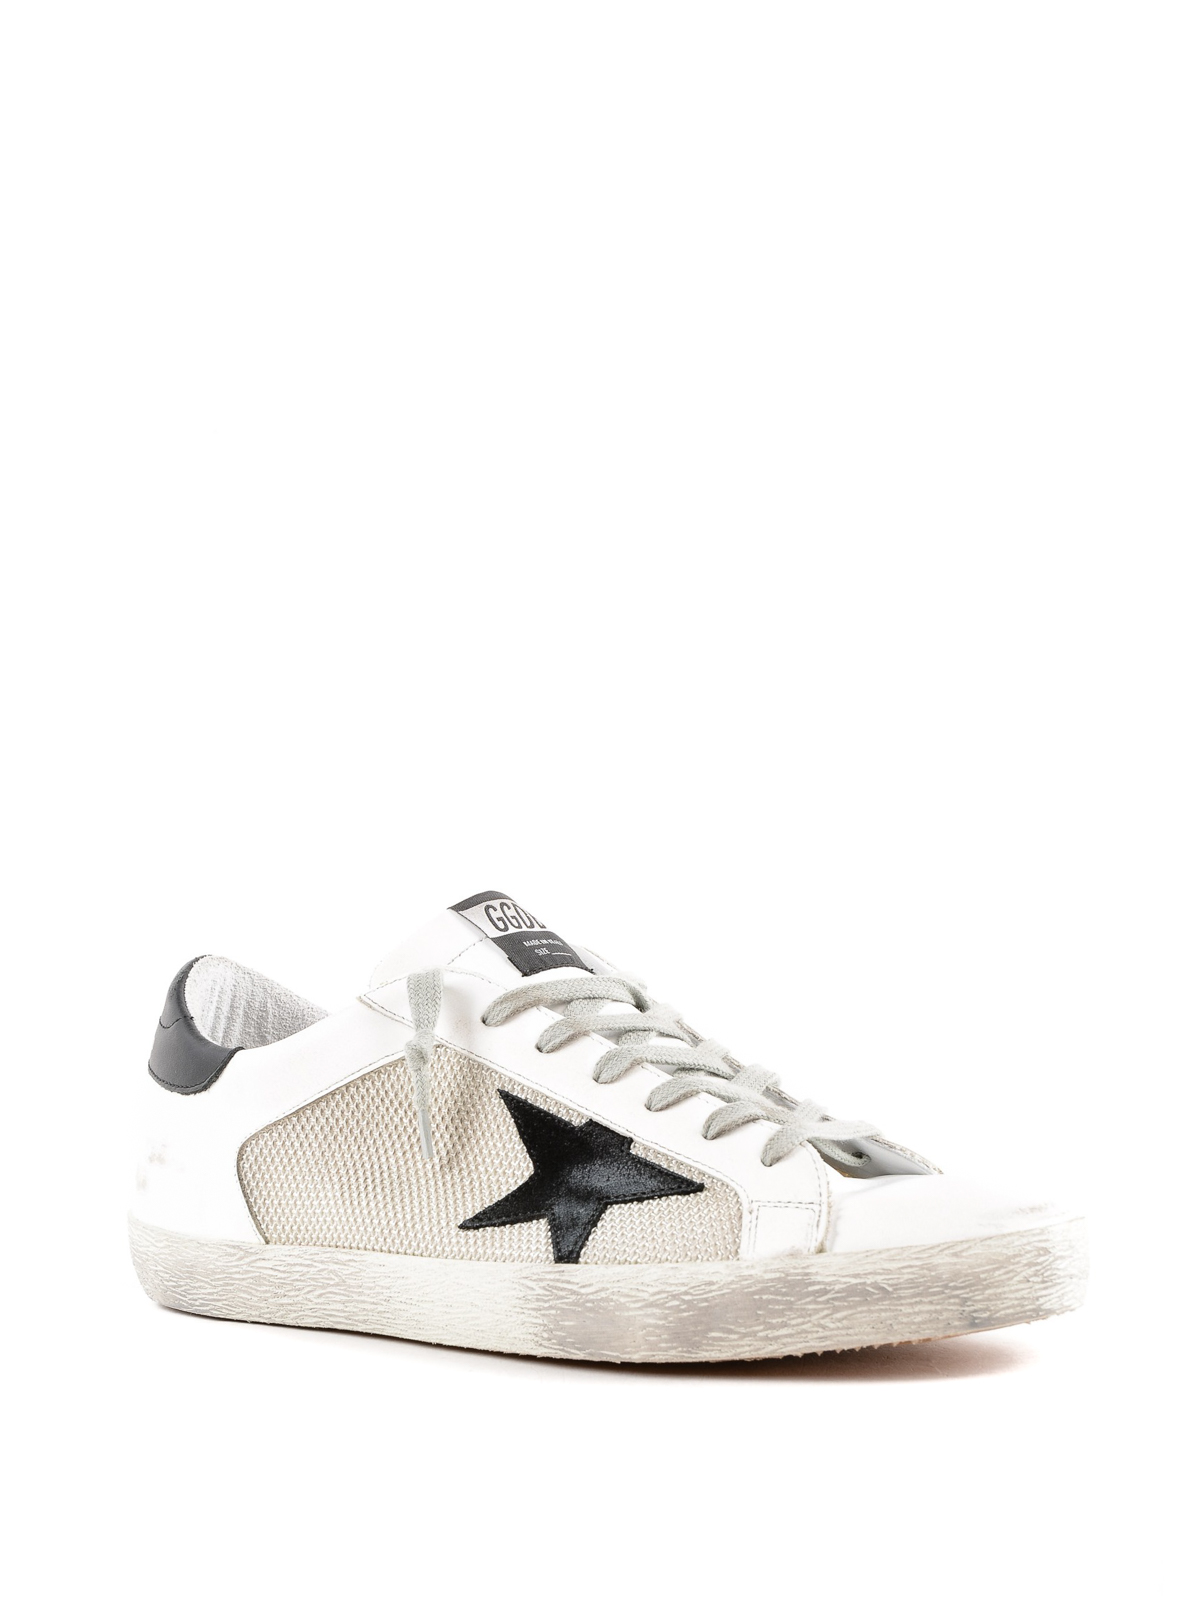 Trainers Golden Goose - Superstar white and black sneakers - G33MS590L26